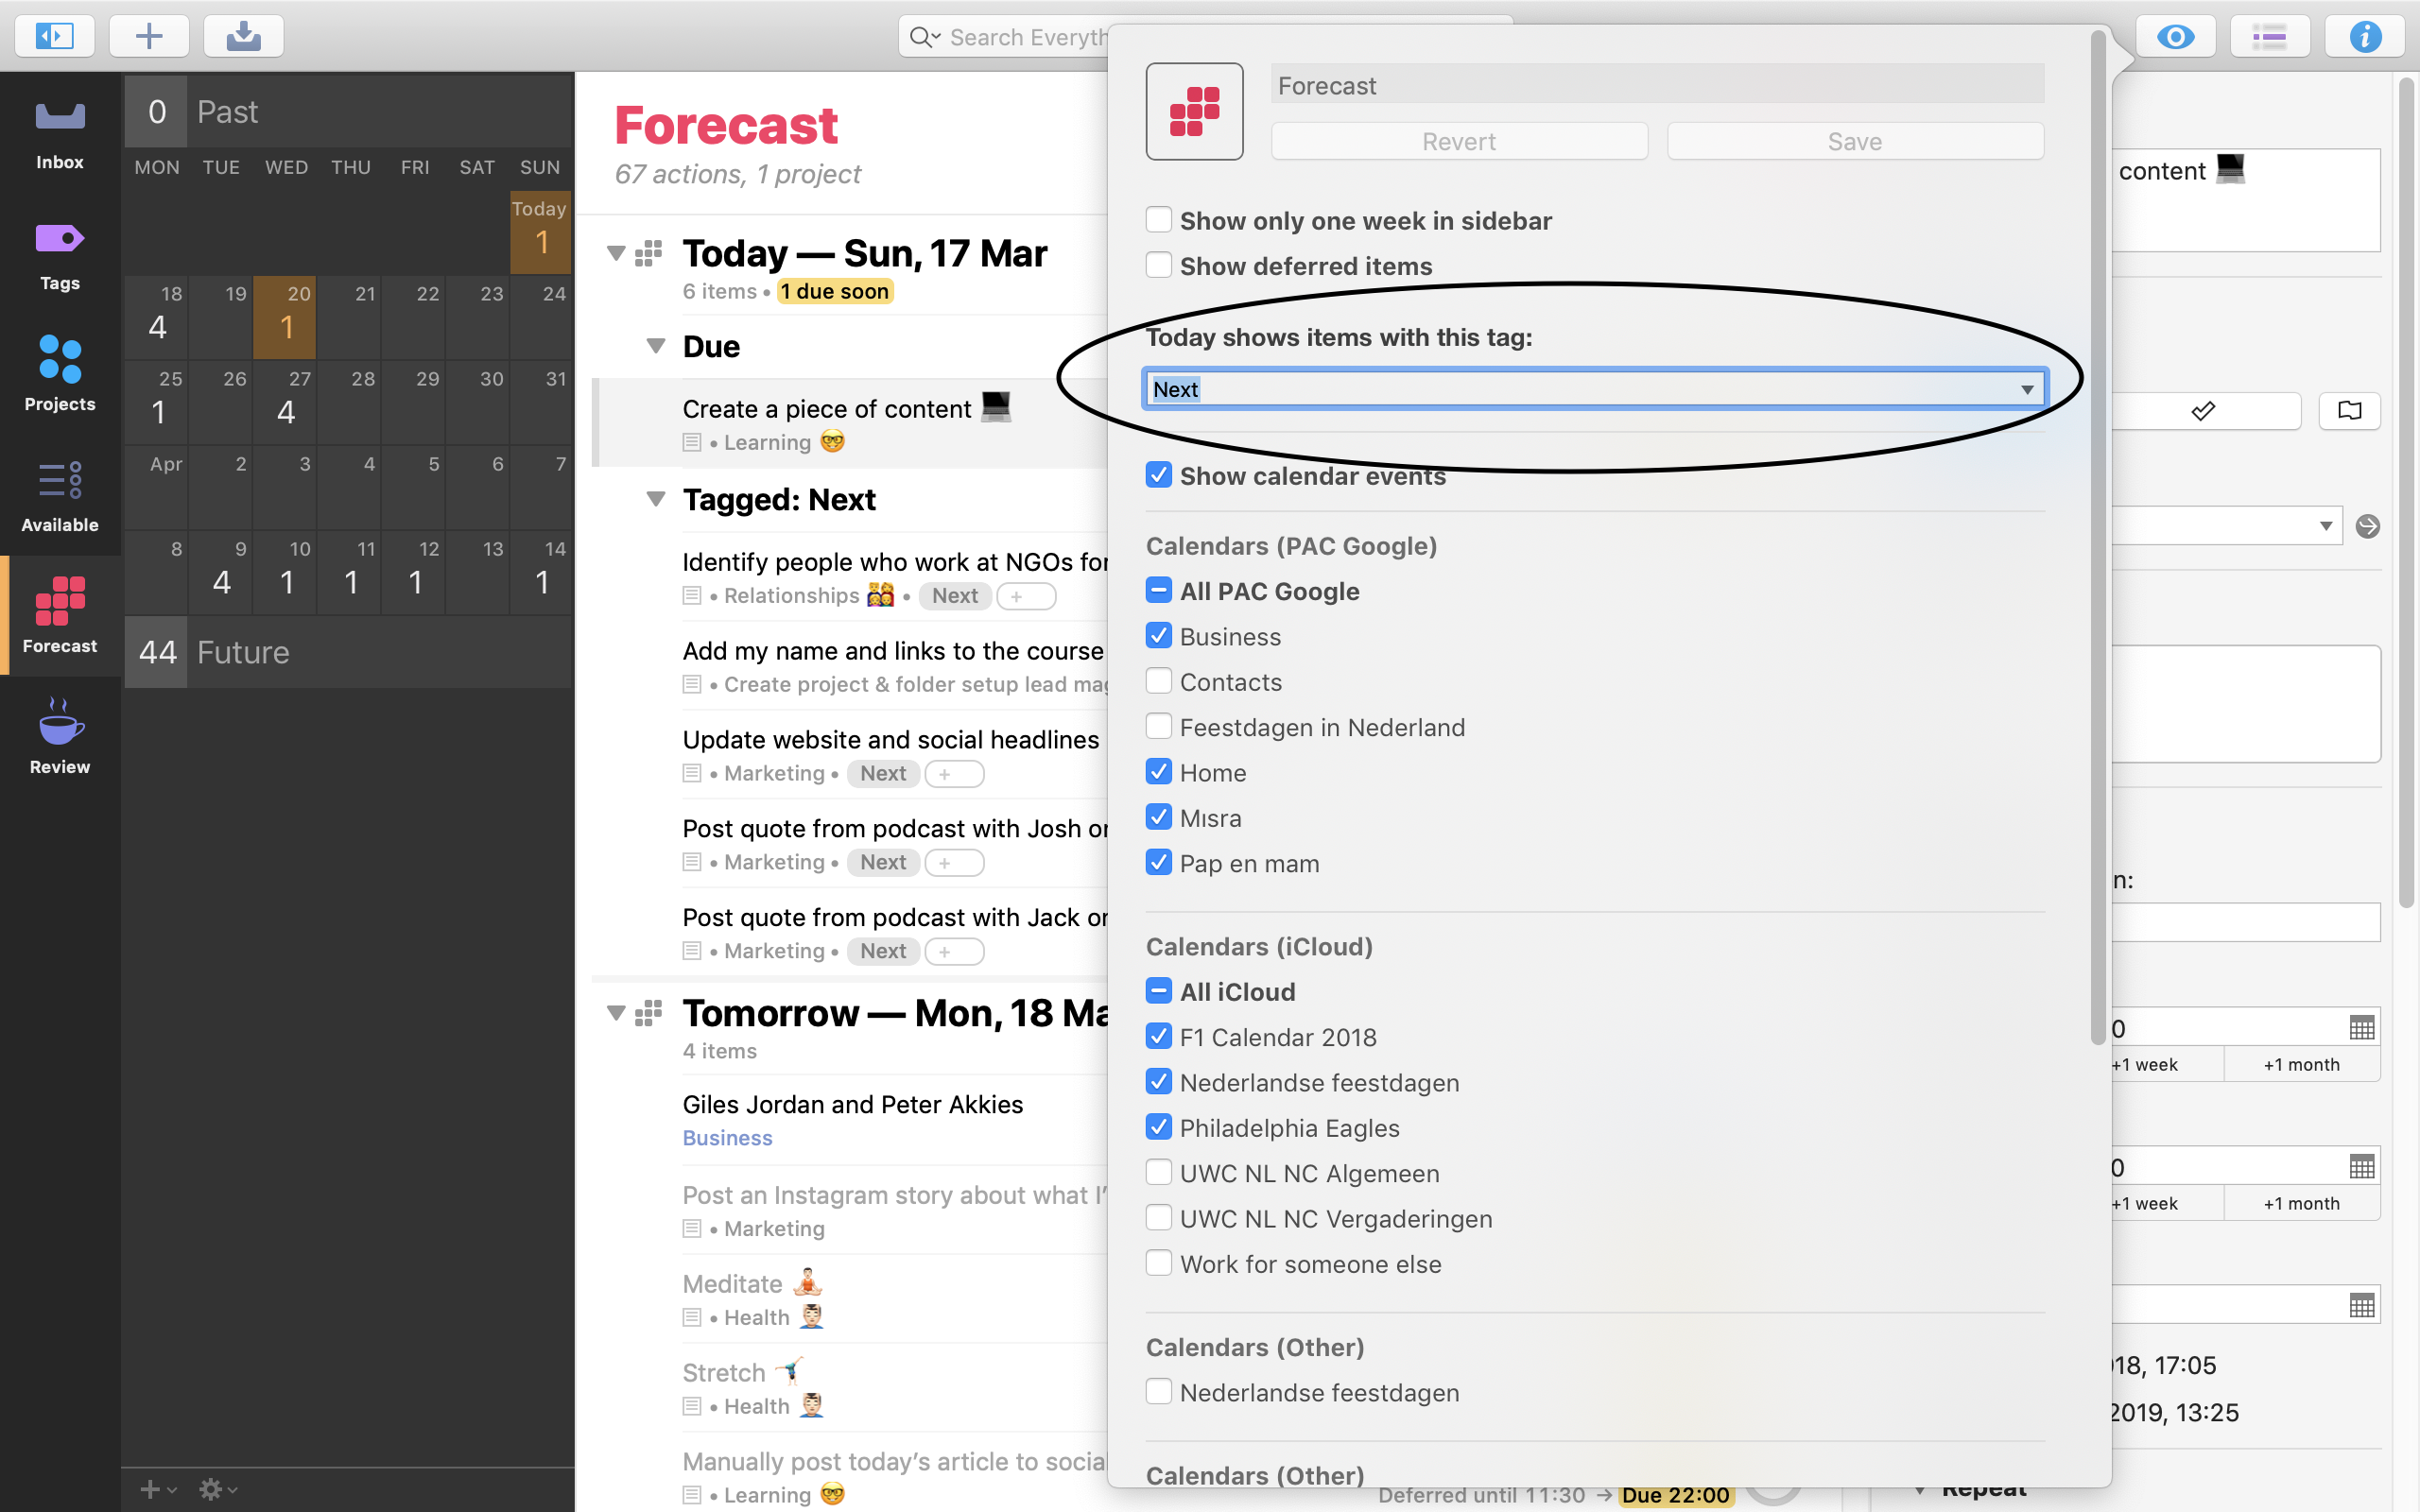 Screenshot showing how to set the Forecast Tag in OmniFocus.